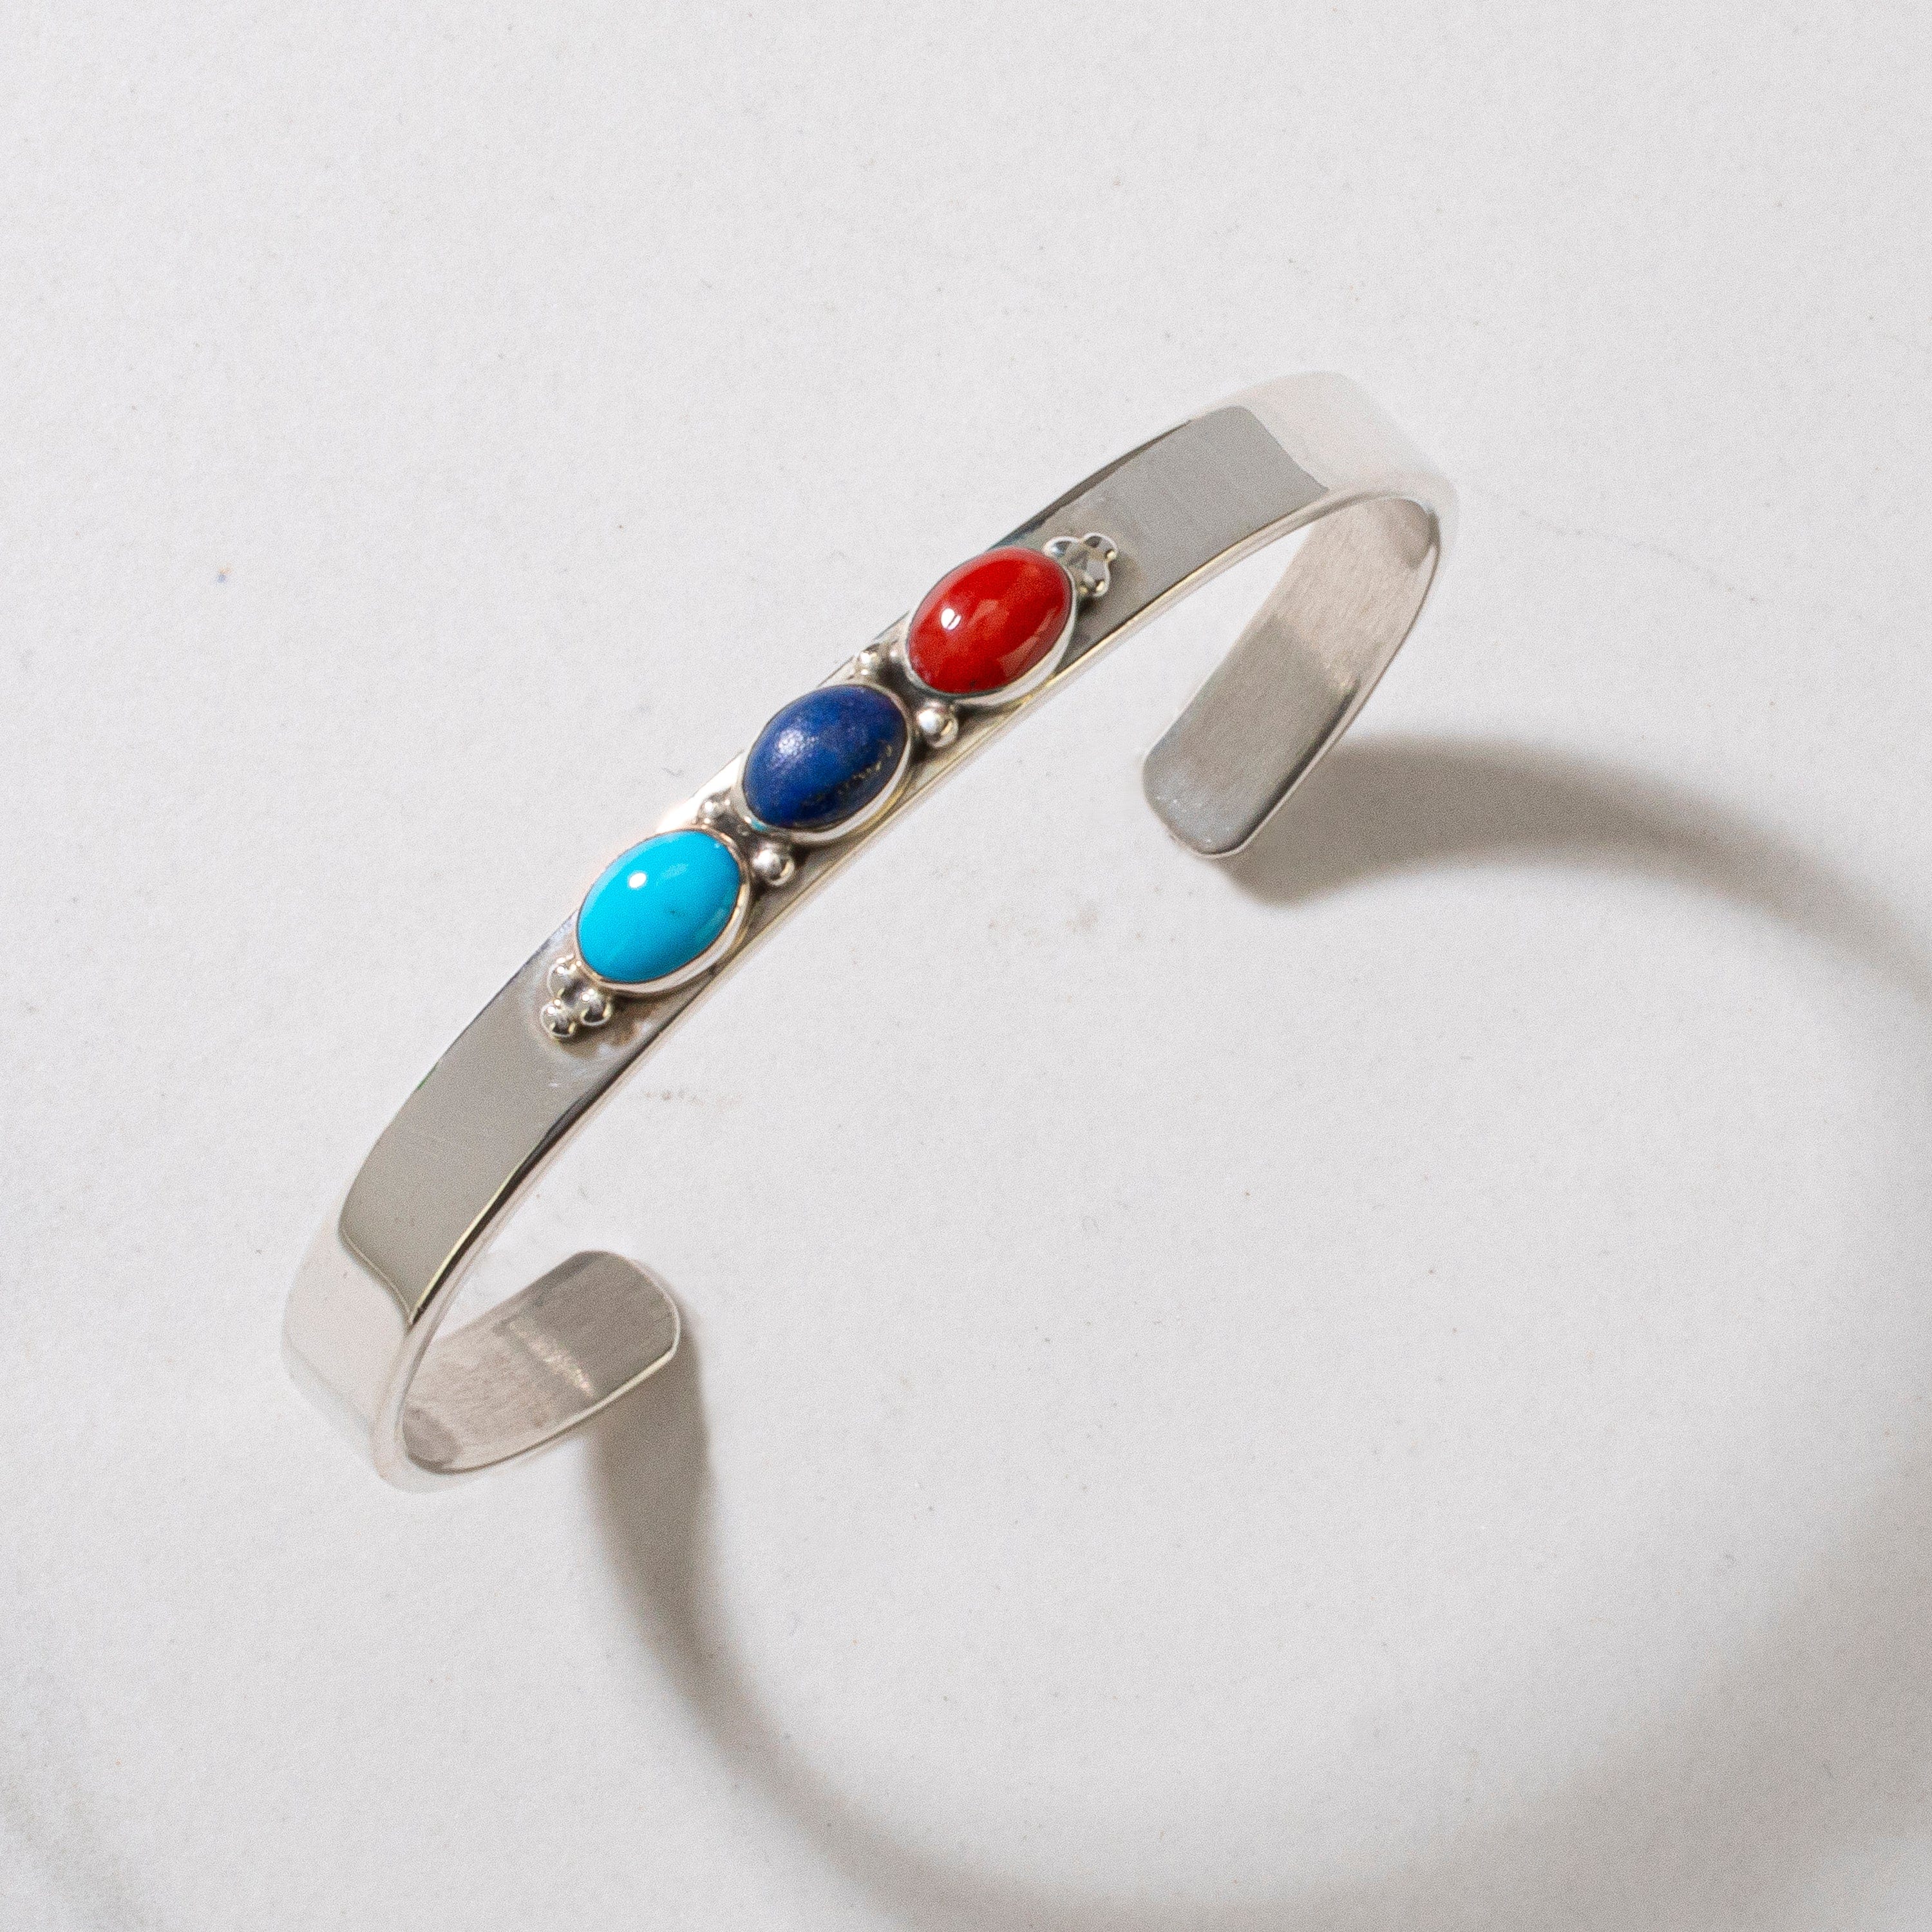 Kalifano Native American Jewelry Sleeping Beauty Turquoise, Coral, Lapis Navajo USA Native American Made 925 Sterling Silver Cuff NAB500.009